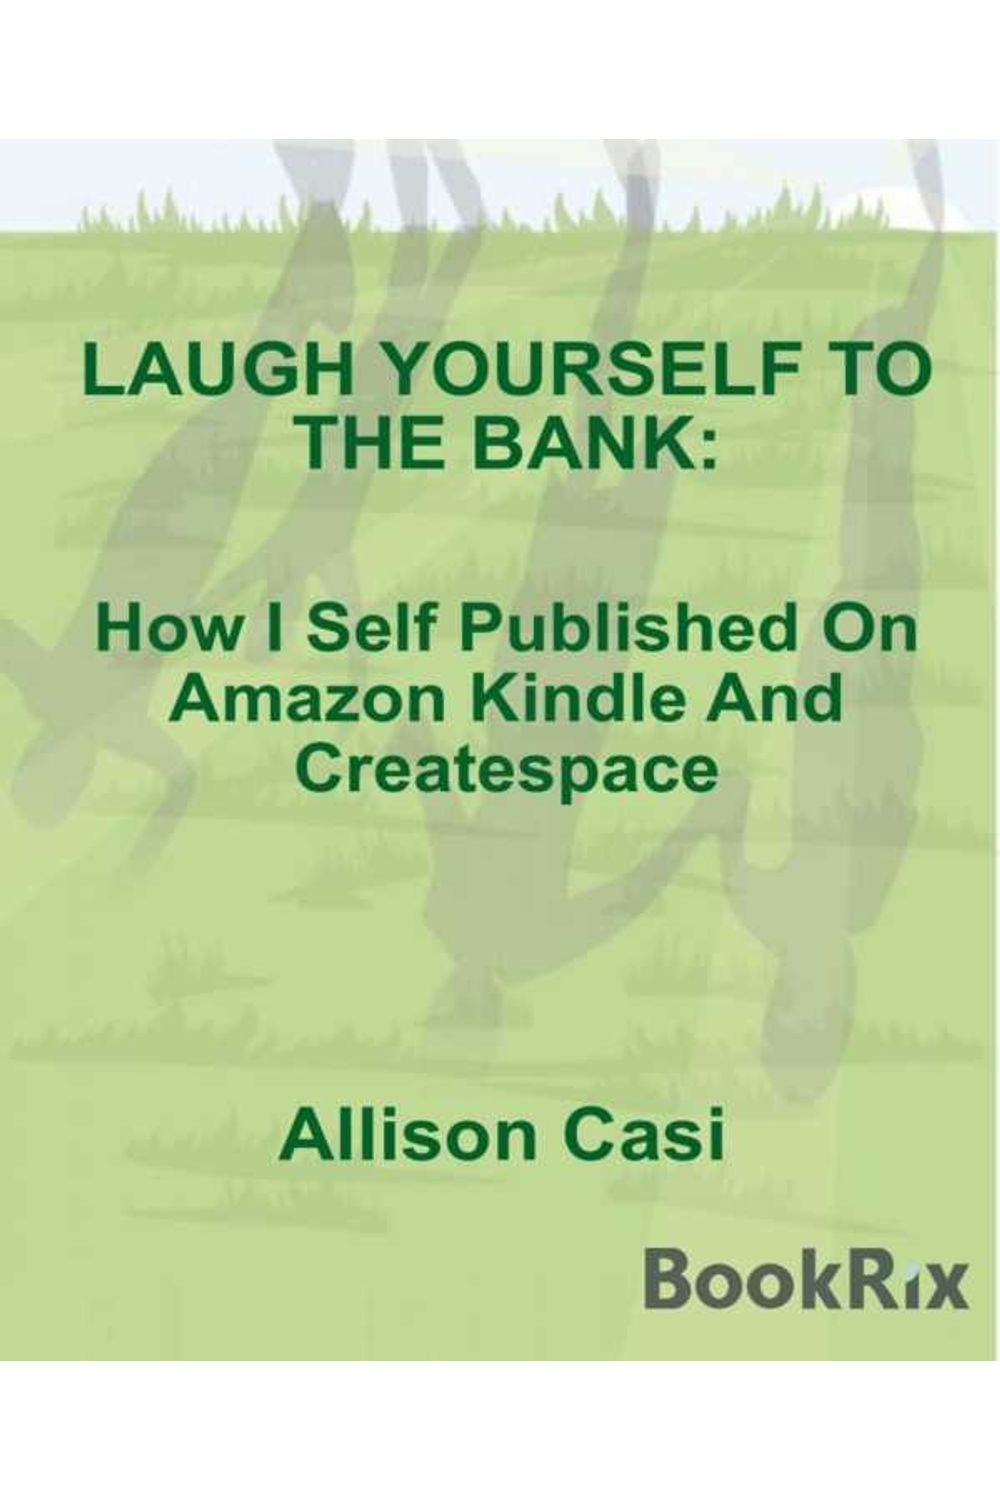 bw-laugh-yourself-to-the-bank-bookrix-9783736886155